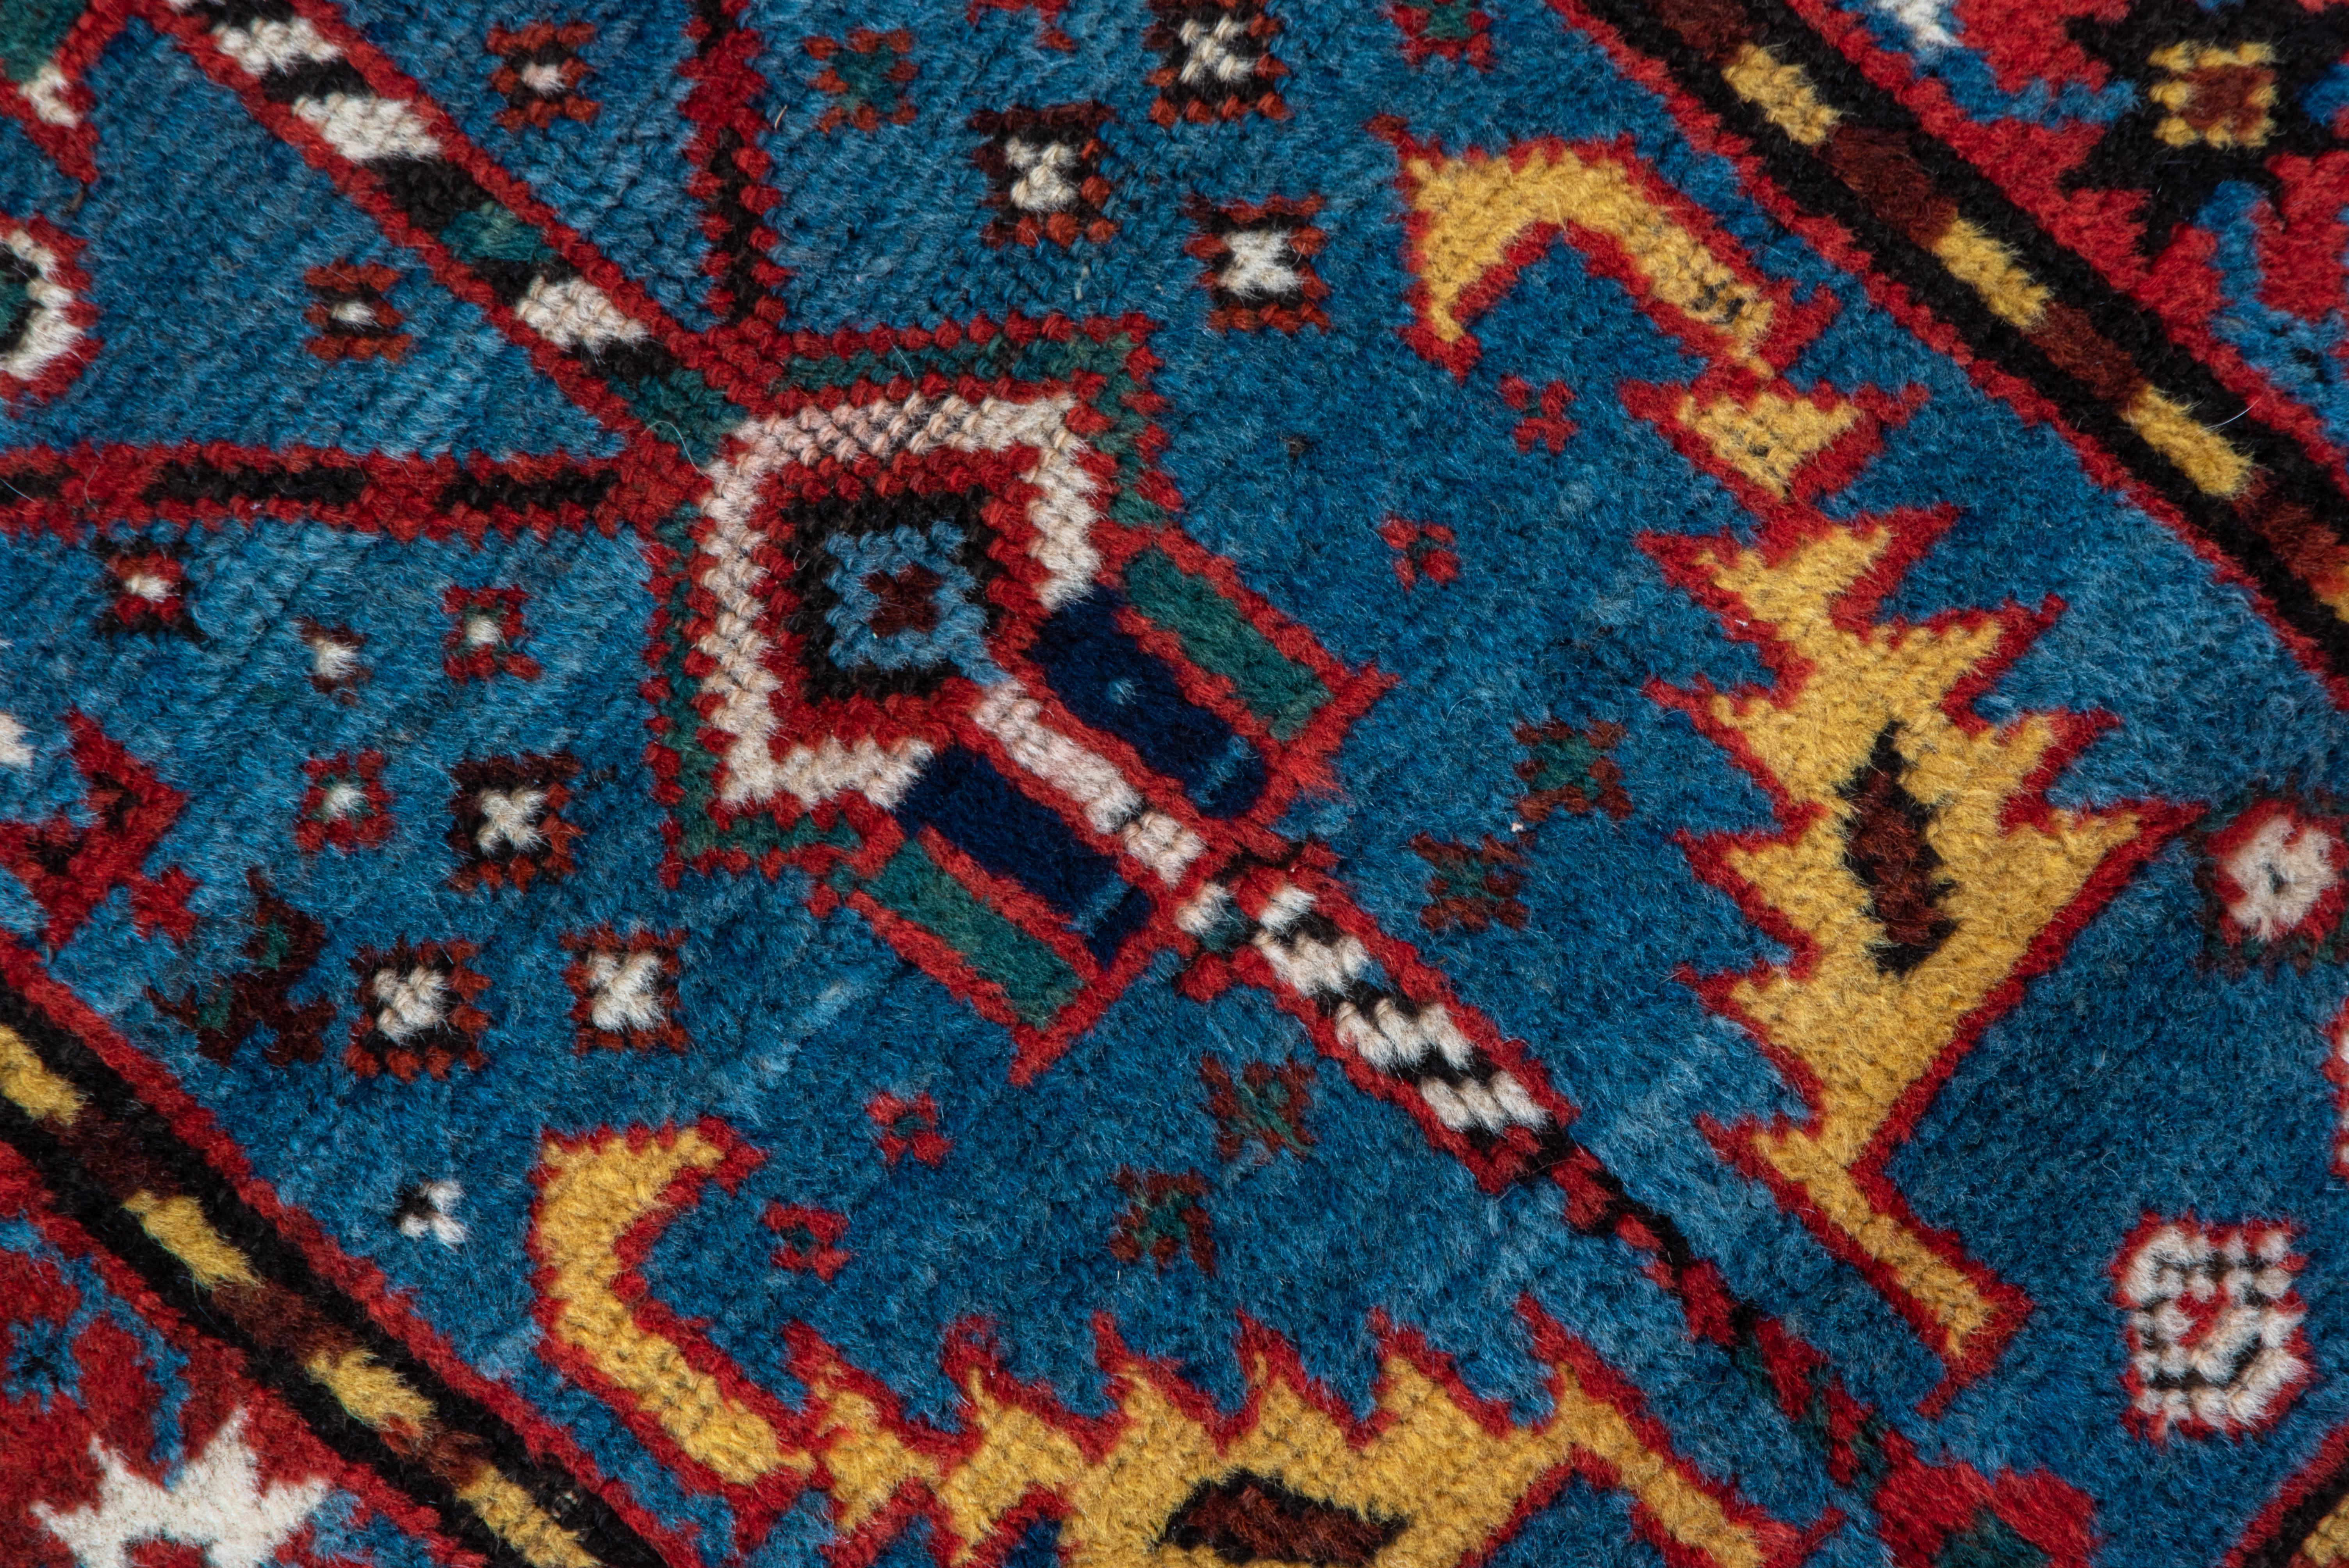 This very versatile small South Caucasian runner shows a brisk cerulean blue field featuring a vertical repeating leaf and flower one-way pattern with accents in straw, chocolate, green and ecru. Off-white main border of joined 